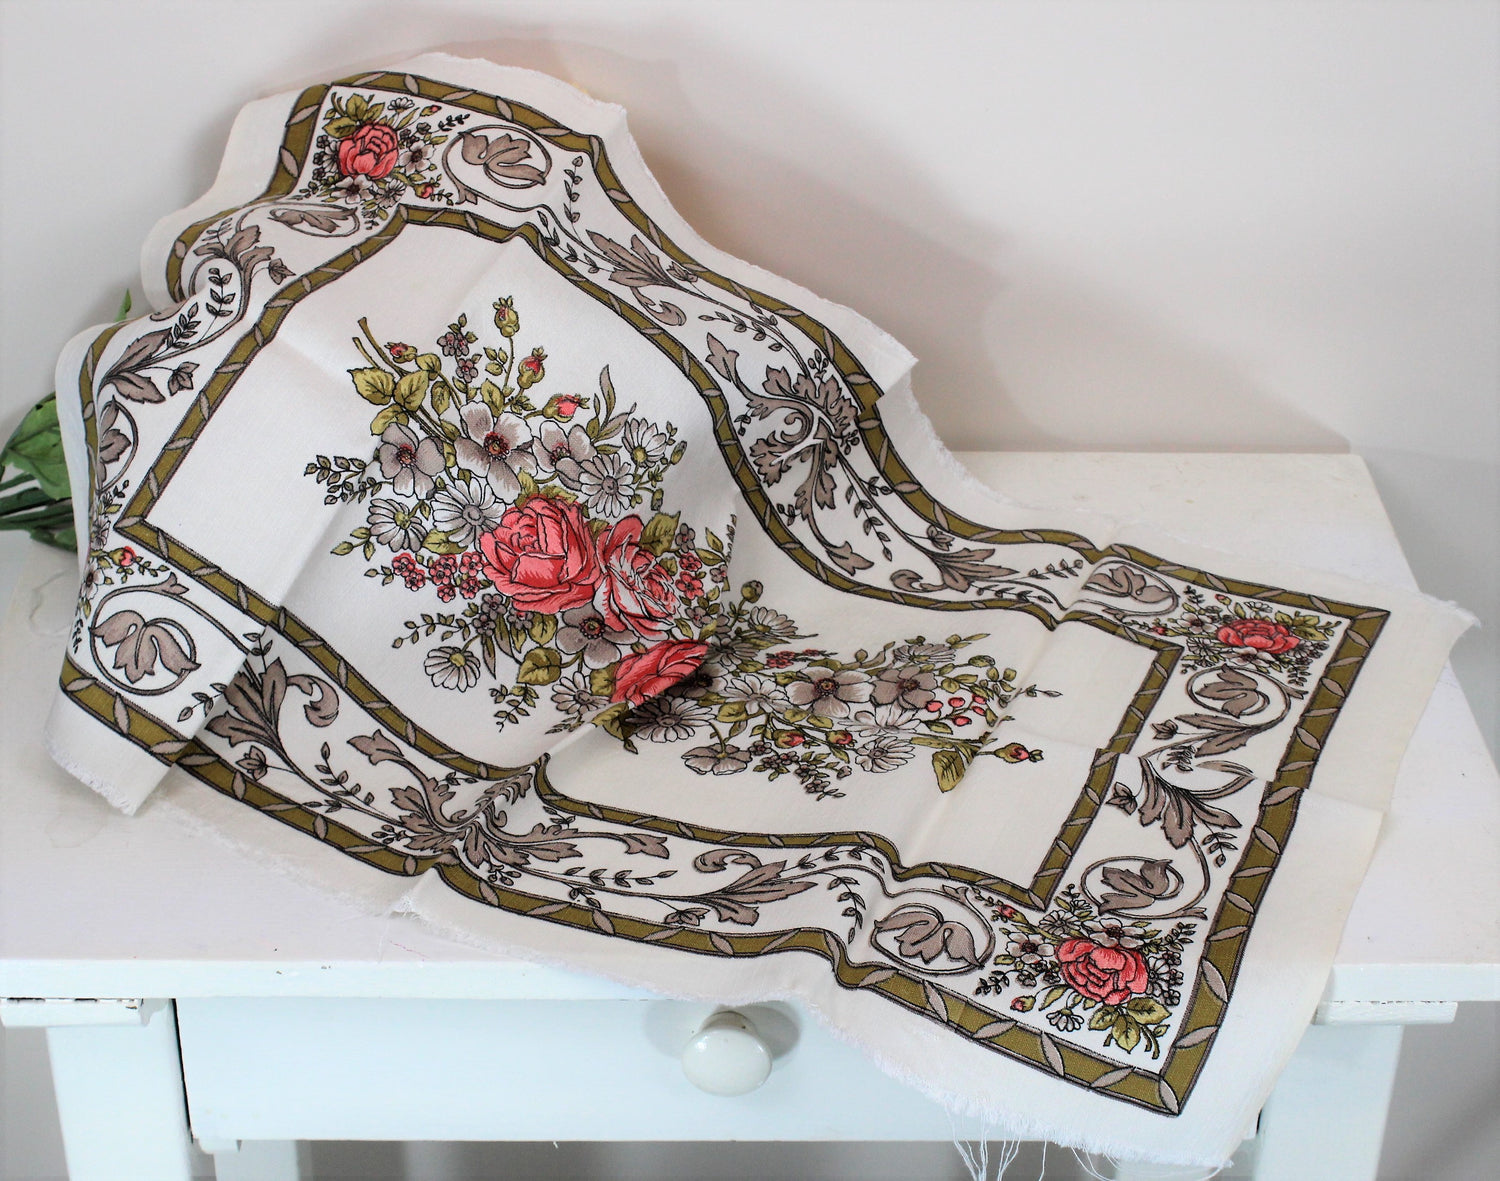 Vintage 1950s Table Runner With Floral Print in White Barkcloth